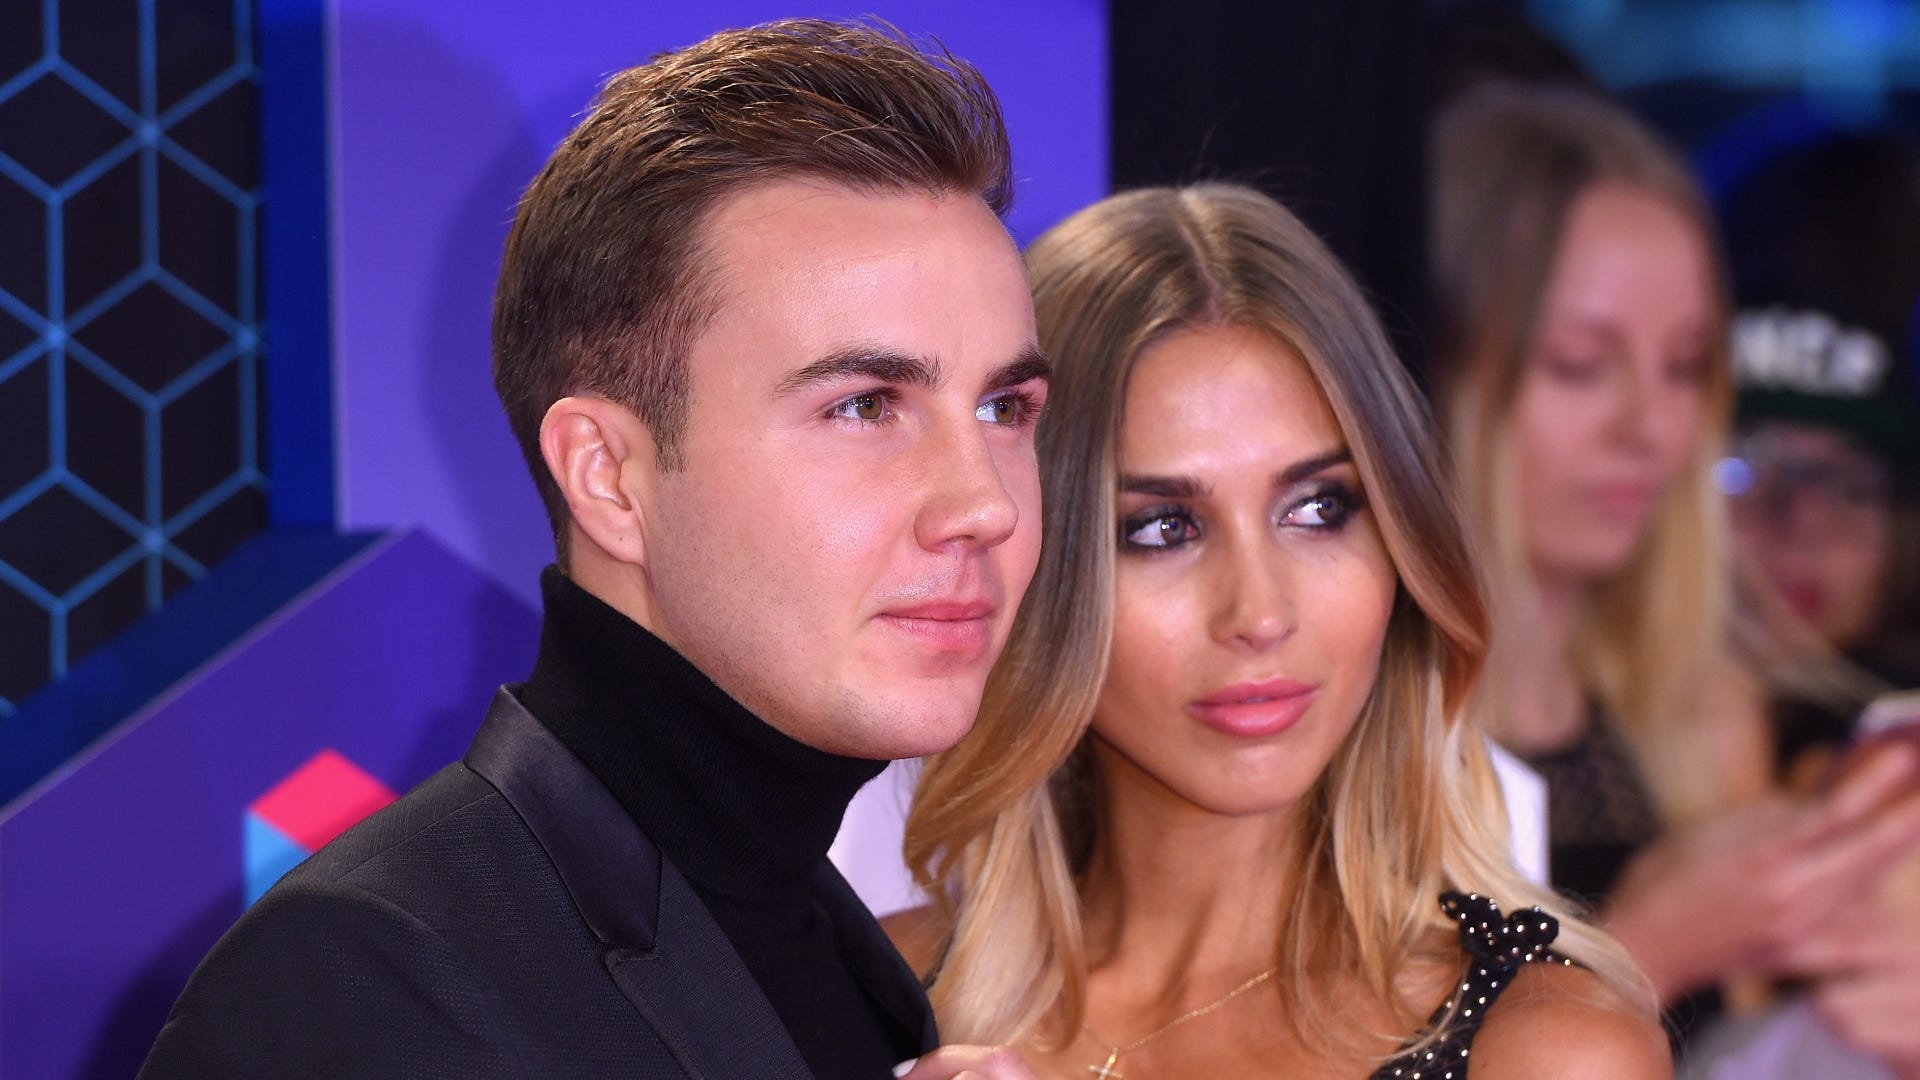 Ann-Kathrin Brommel opens up about marriage with Mario Gotze at Oaks Day